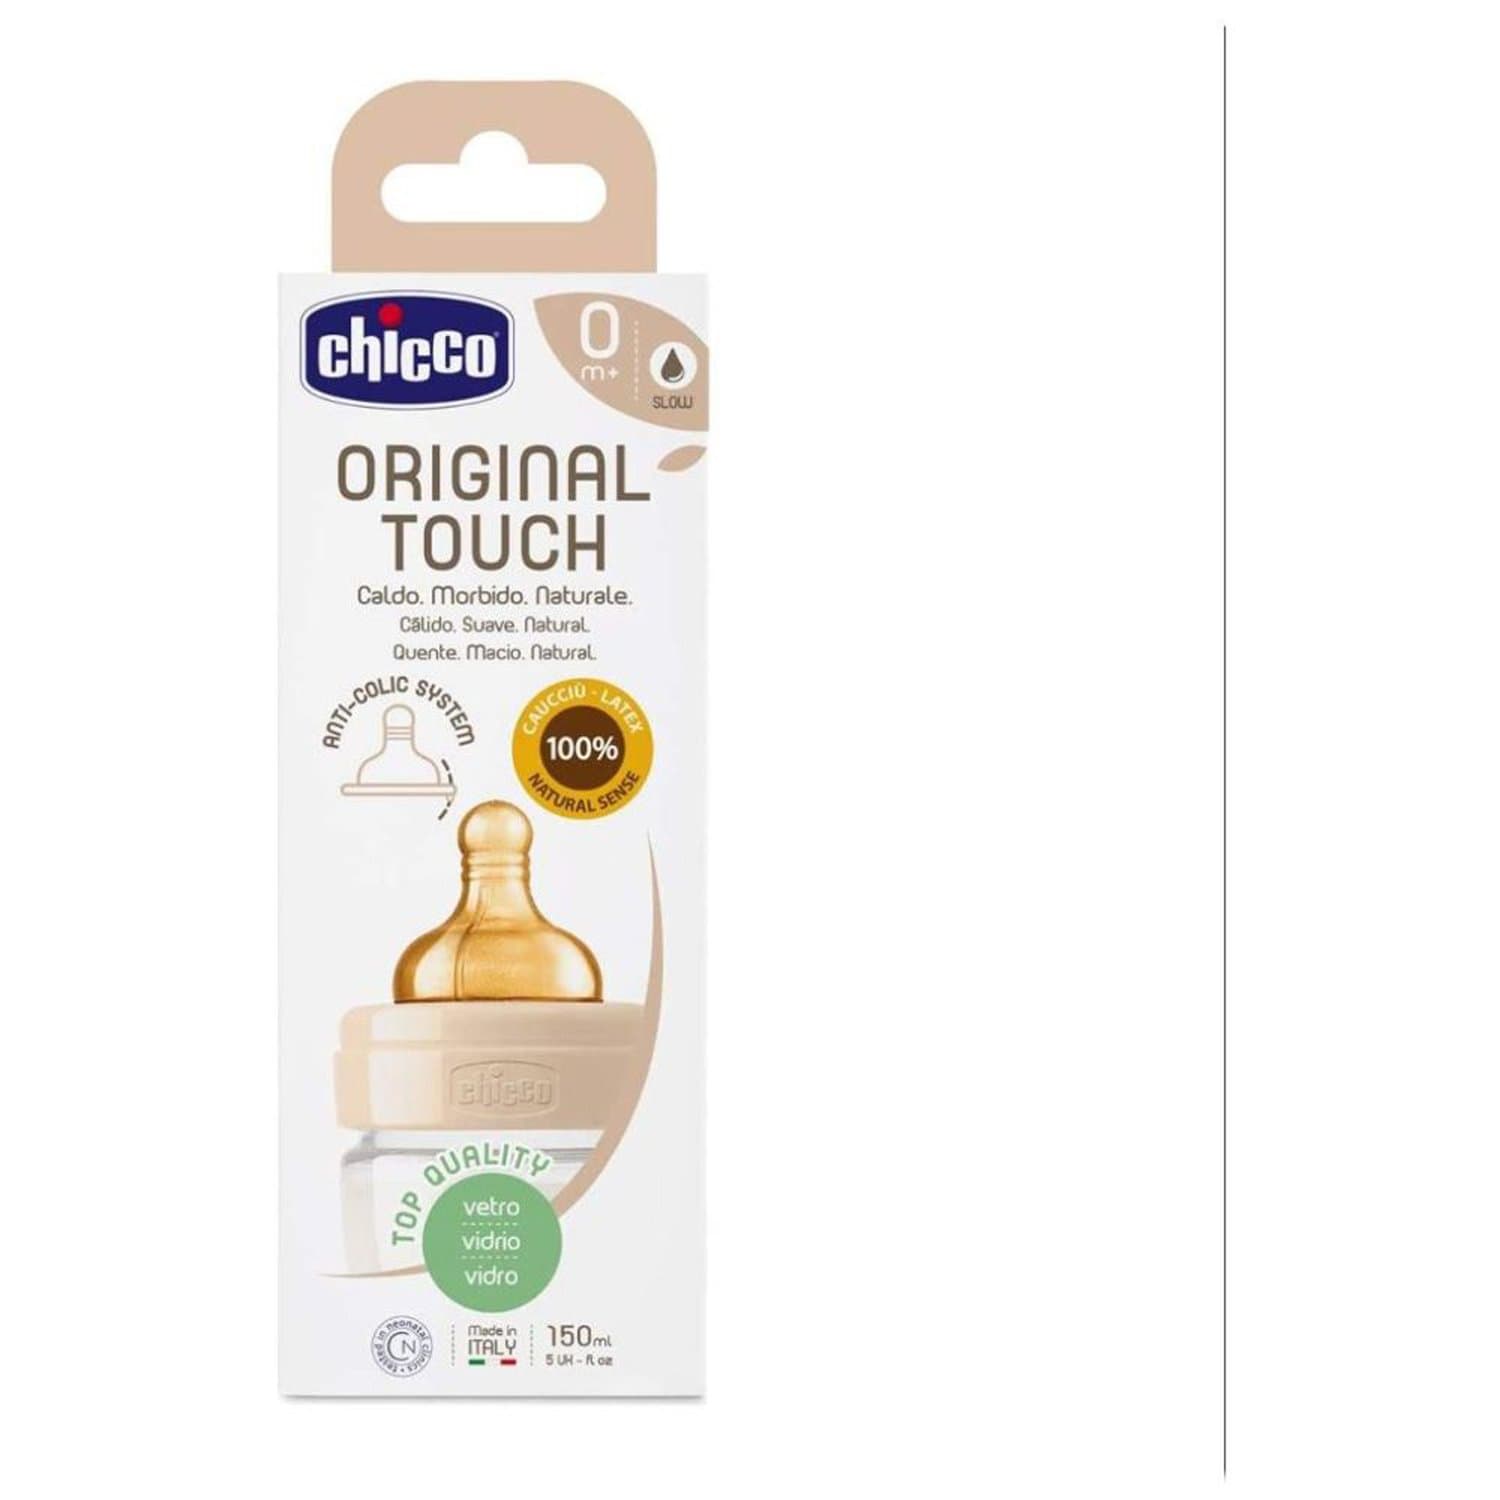 CHICCO ORIGINAL TOUCH GLASS BOTTLE 150ML SLOW FLOW 0M+ LATEX NEUTRAL